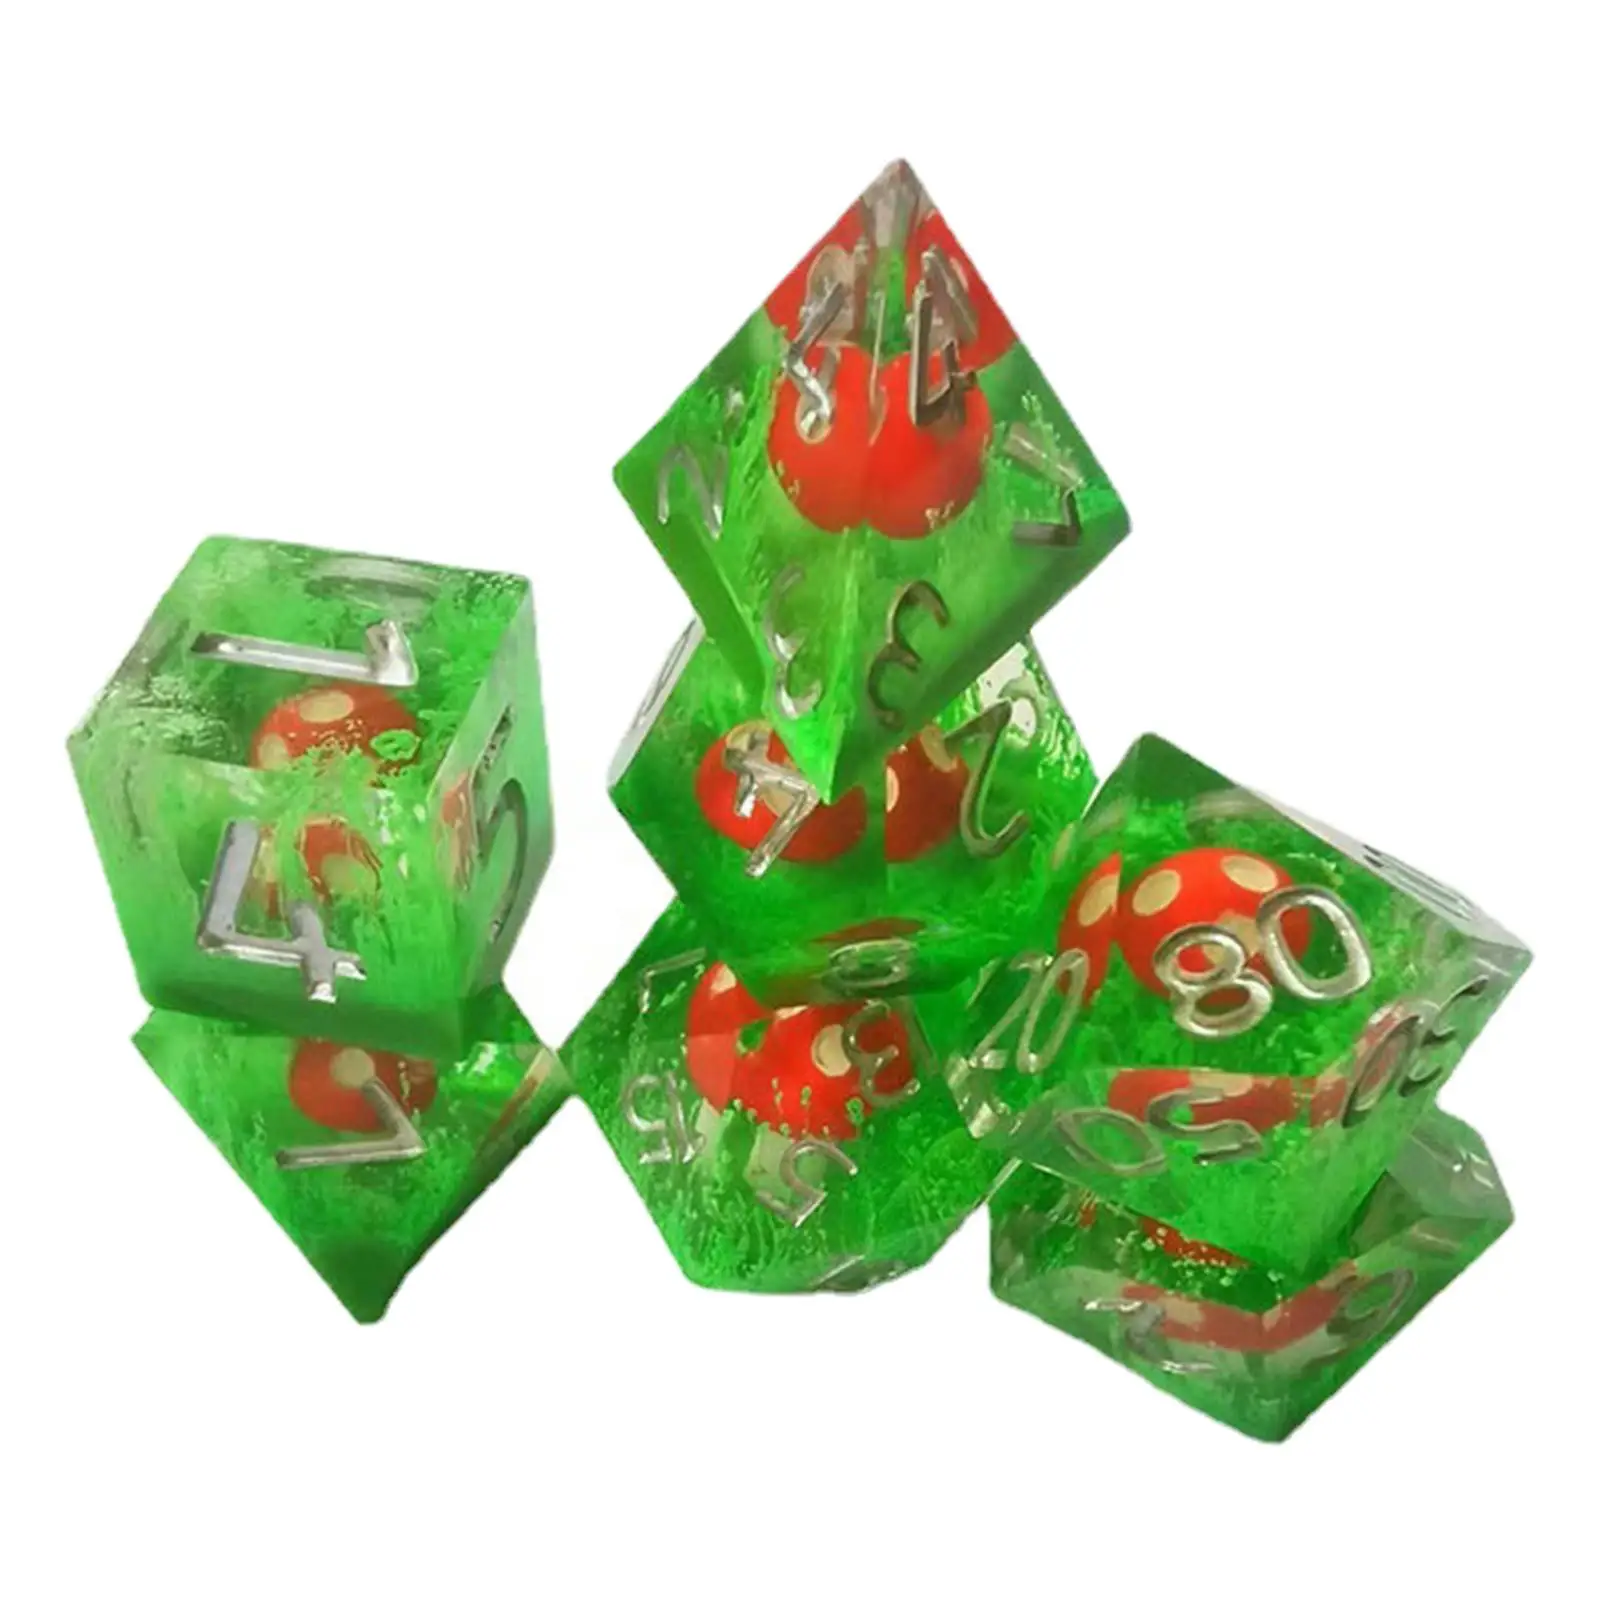 

7x Acrylic Multi Side Dices Set Digital Dices Green D20 D12 D10 D8 D6 D4 for RPG DND Educational Toys Party Table Gaming